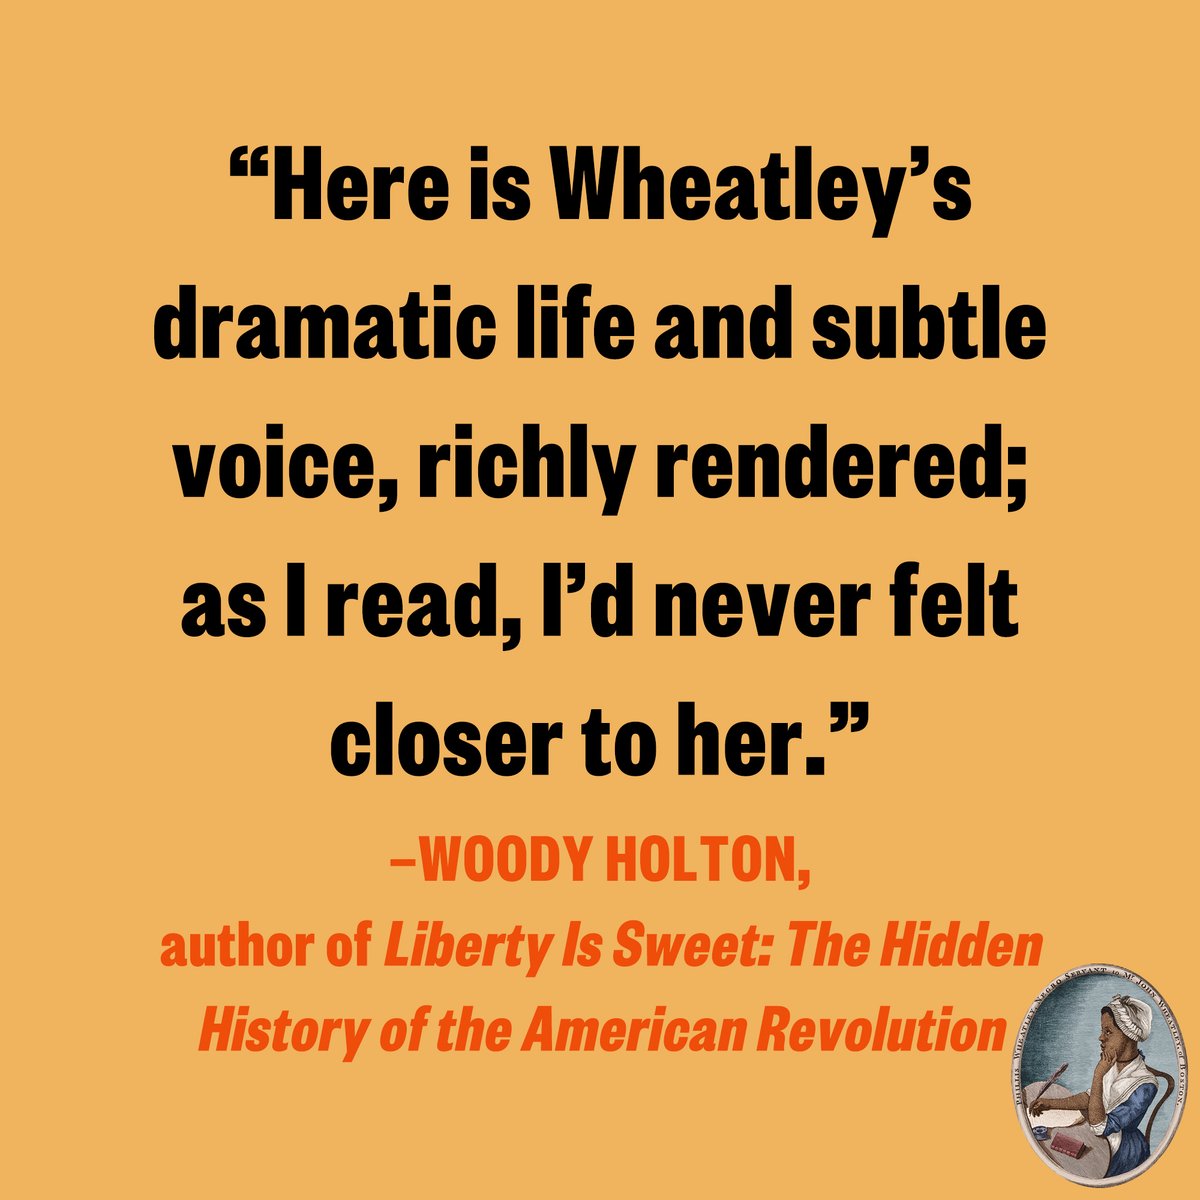 David Waldstreicher’s THE ODYSSEY OF PHILLIS WHEATLEY is a paradigm-shattering biography of Phillis Wheatley, whose extraordinary poetry set African American literature at the heart of the American Revolution. In paperback today! bit.ly/48Iohkx